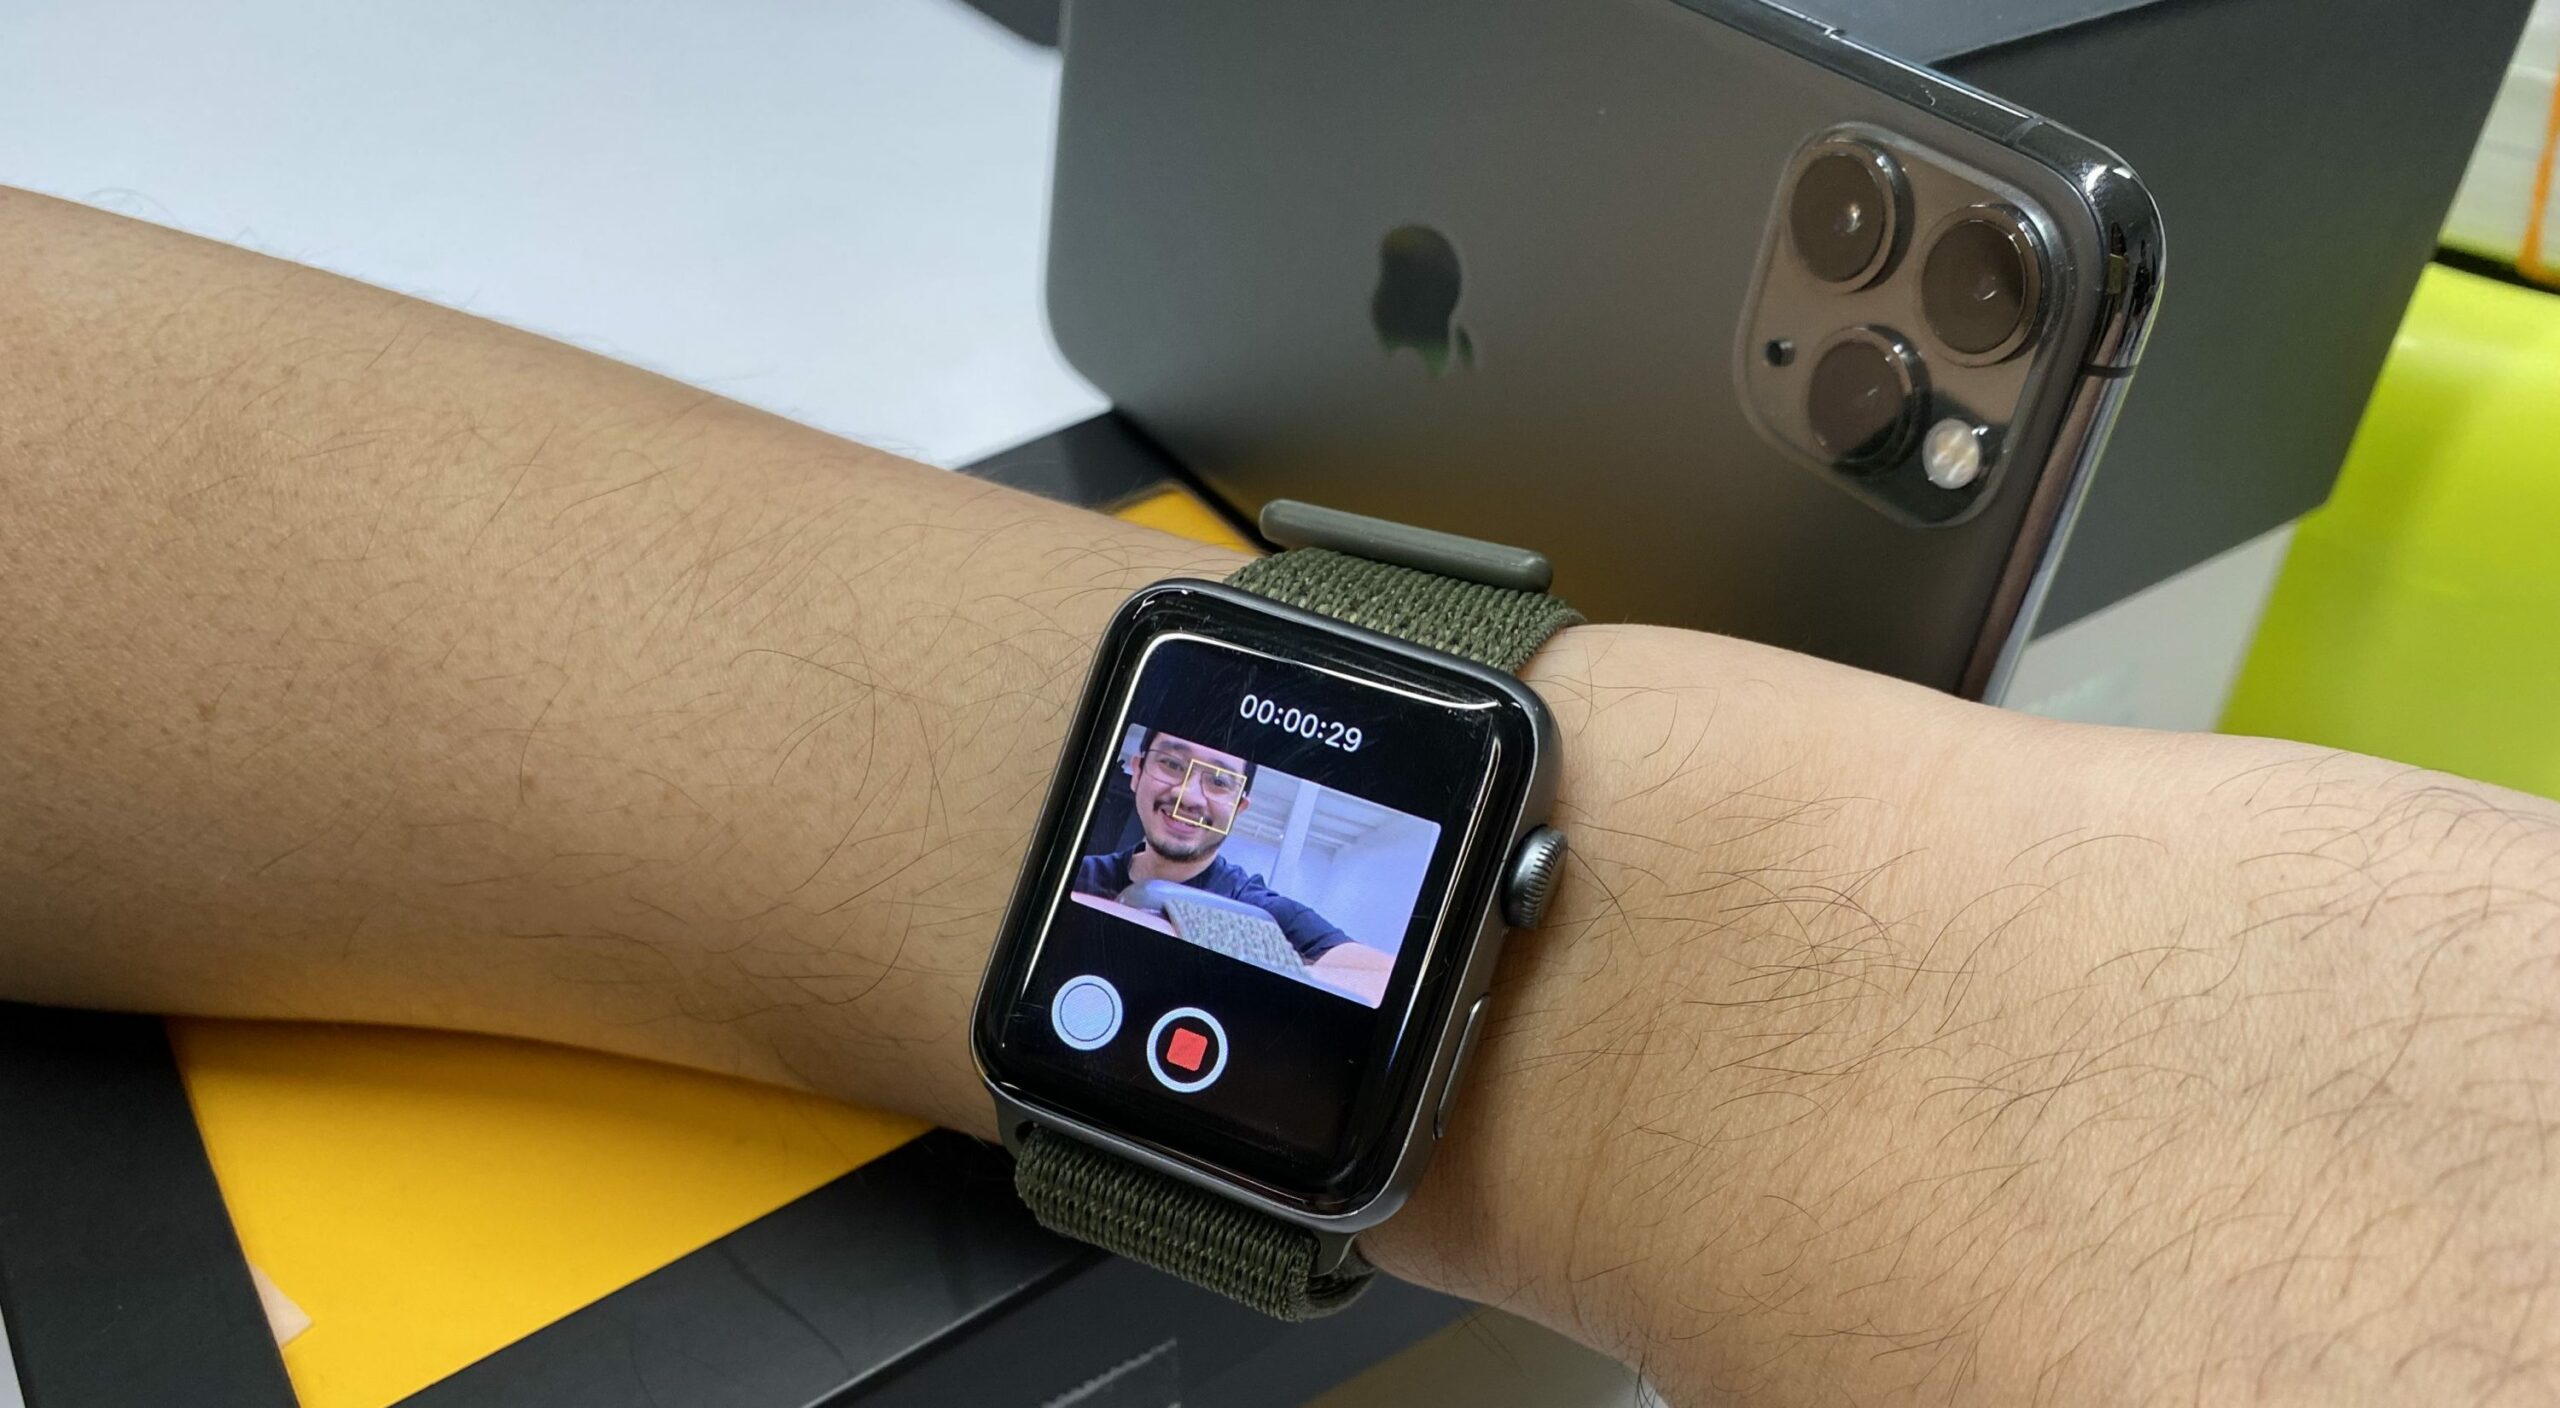 How to utilize your Apple Watch as a viewfinder and remote for your iPhone’s camera is here